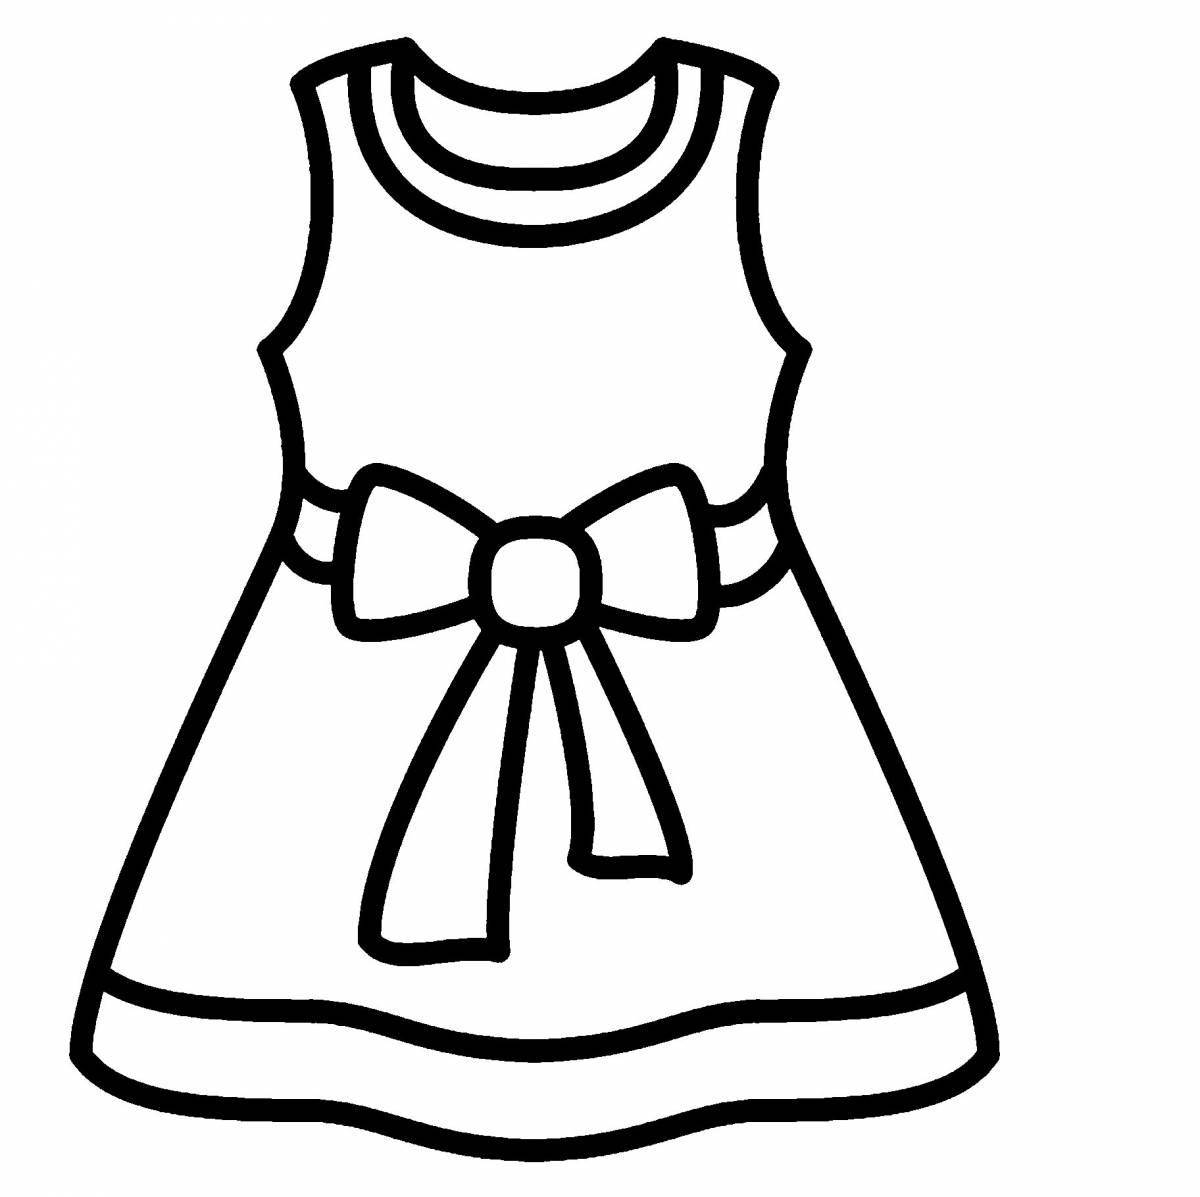 Coloring book bright doll dress for children 4-5 years old